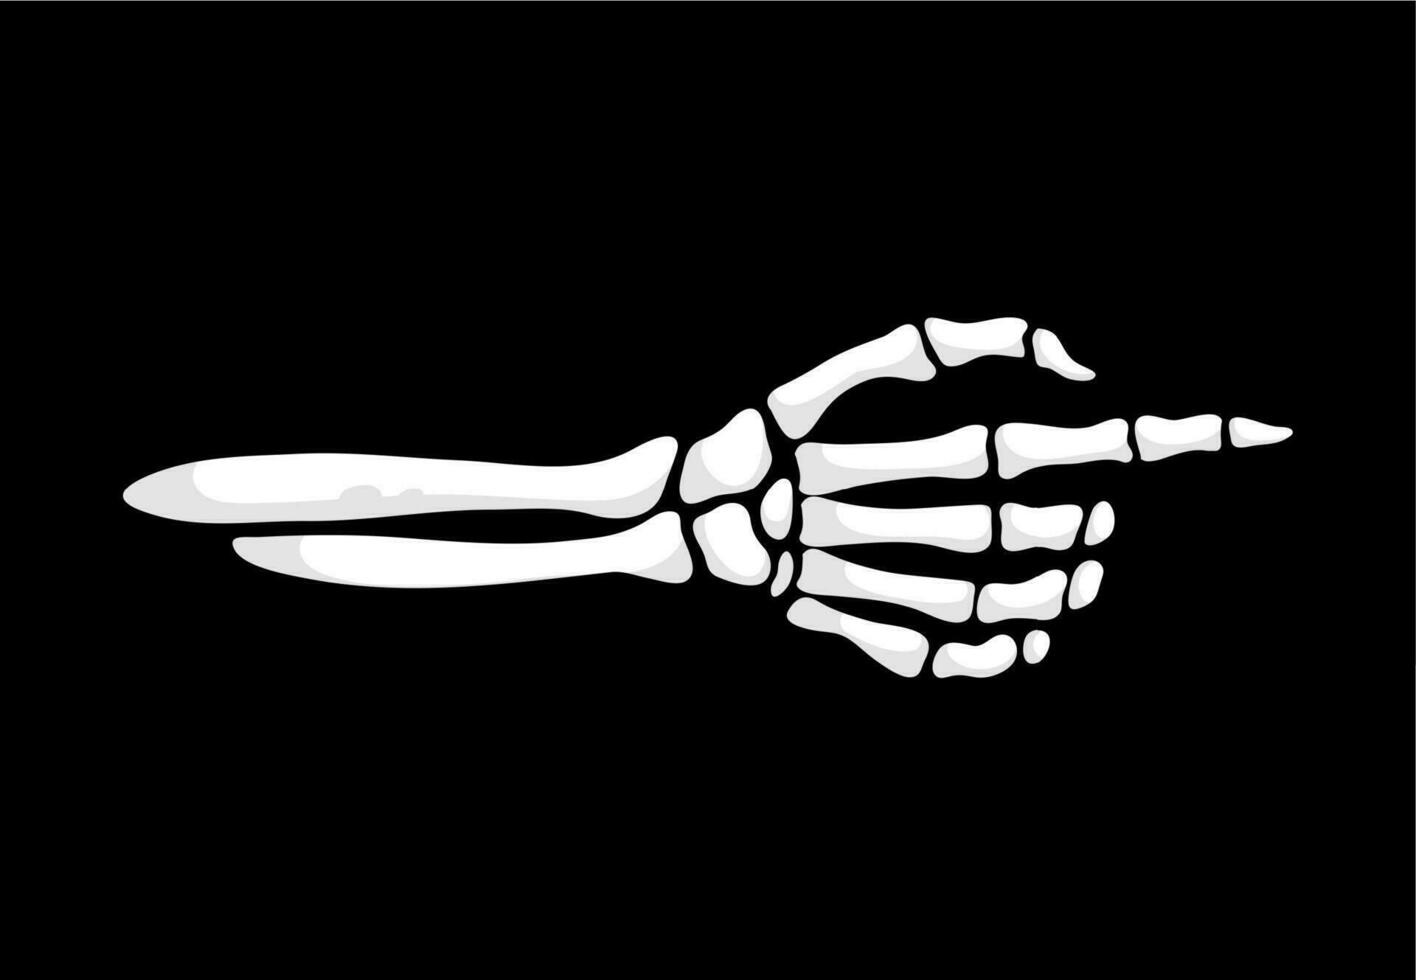 Skeleton hand pointing gesture indicates direction vector